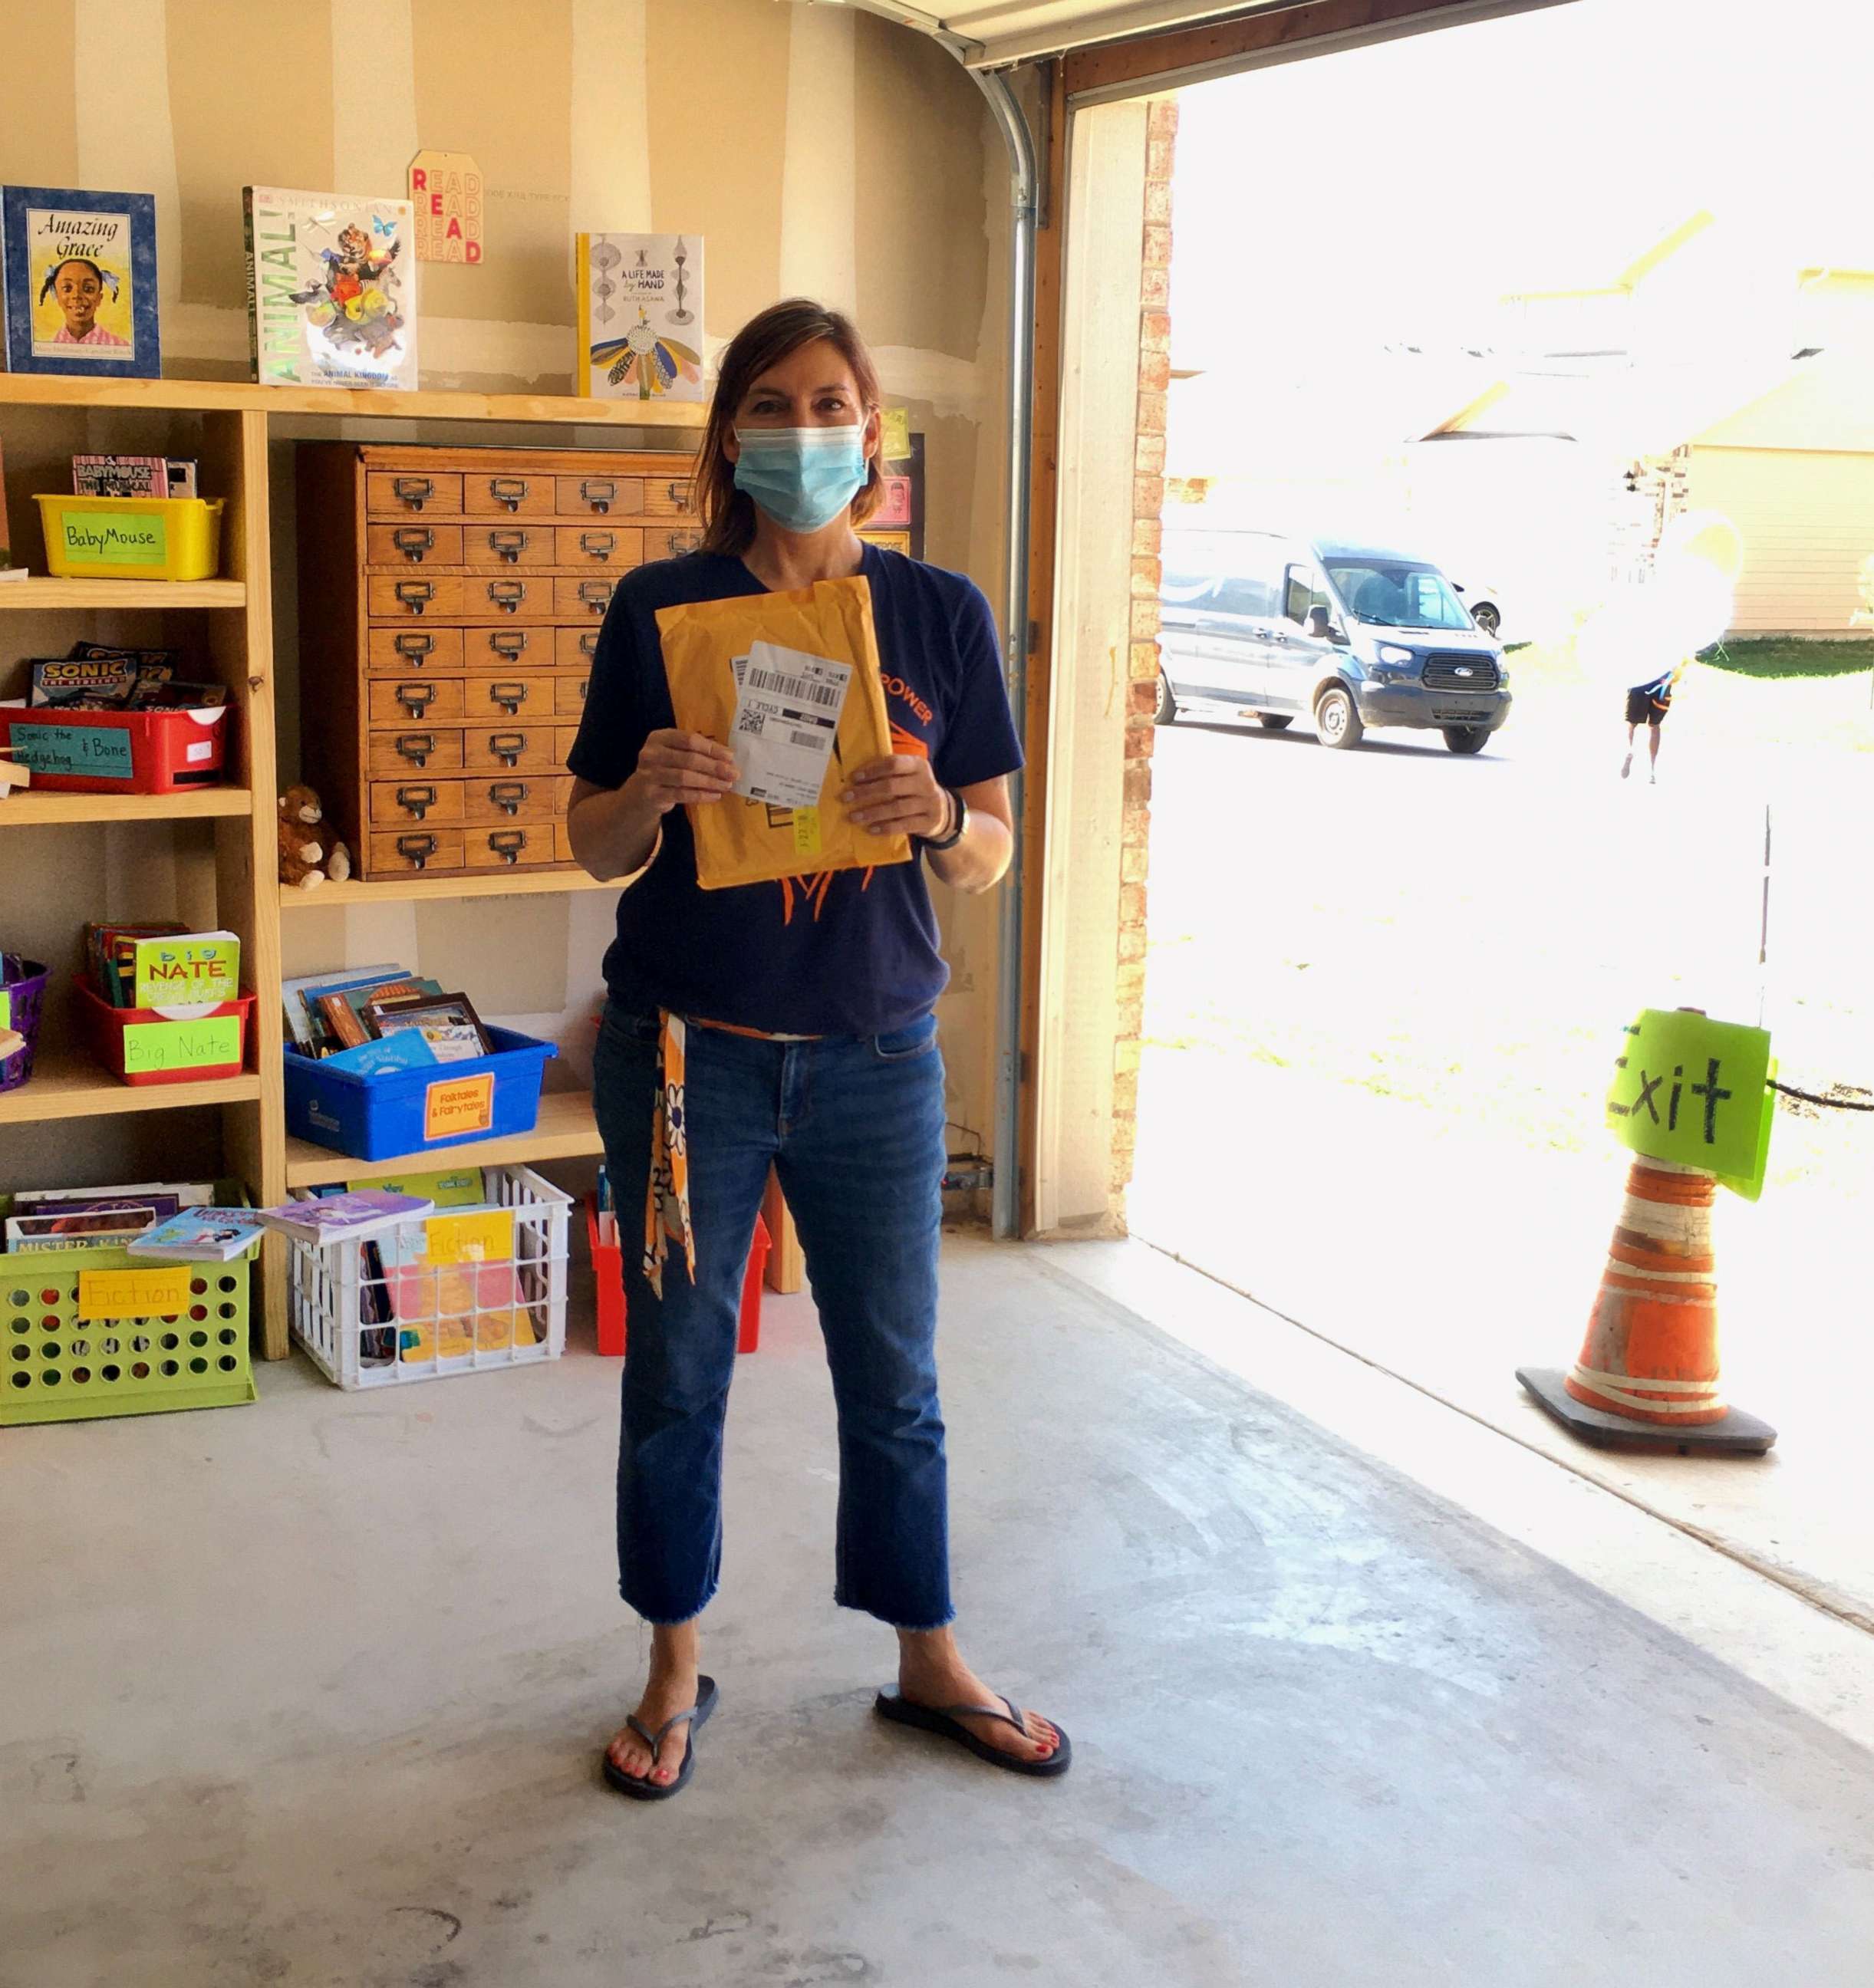 PHOTO: Jennifer Martin, an elementary school teacher in Texas, created a public library in the garage of her home.